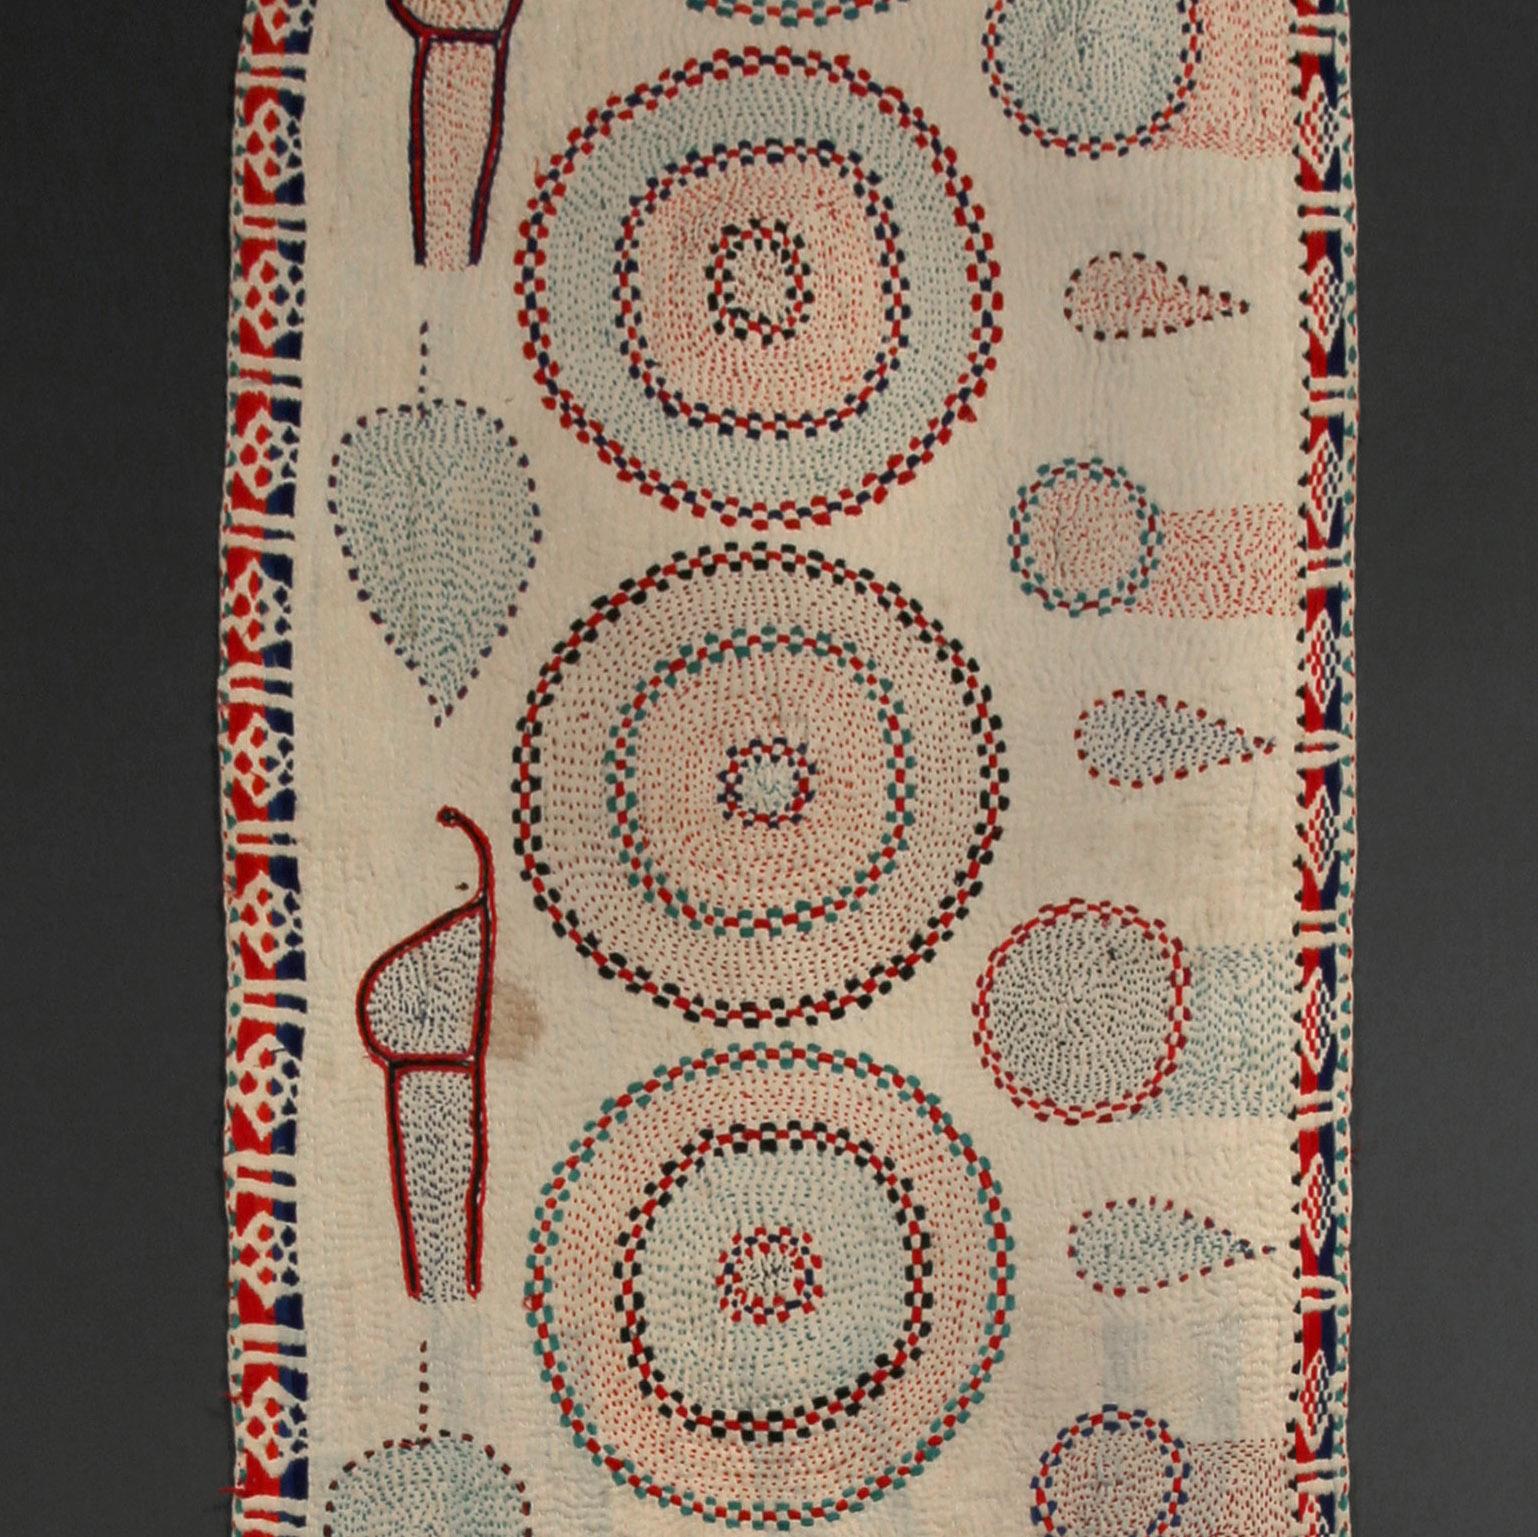 Hand-Woven Ca. 1920 Betel Nut Offering Cloth 'Kantha' from West Bangal, India For Sale